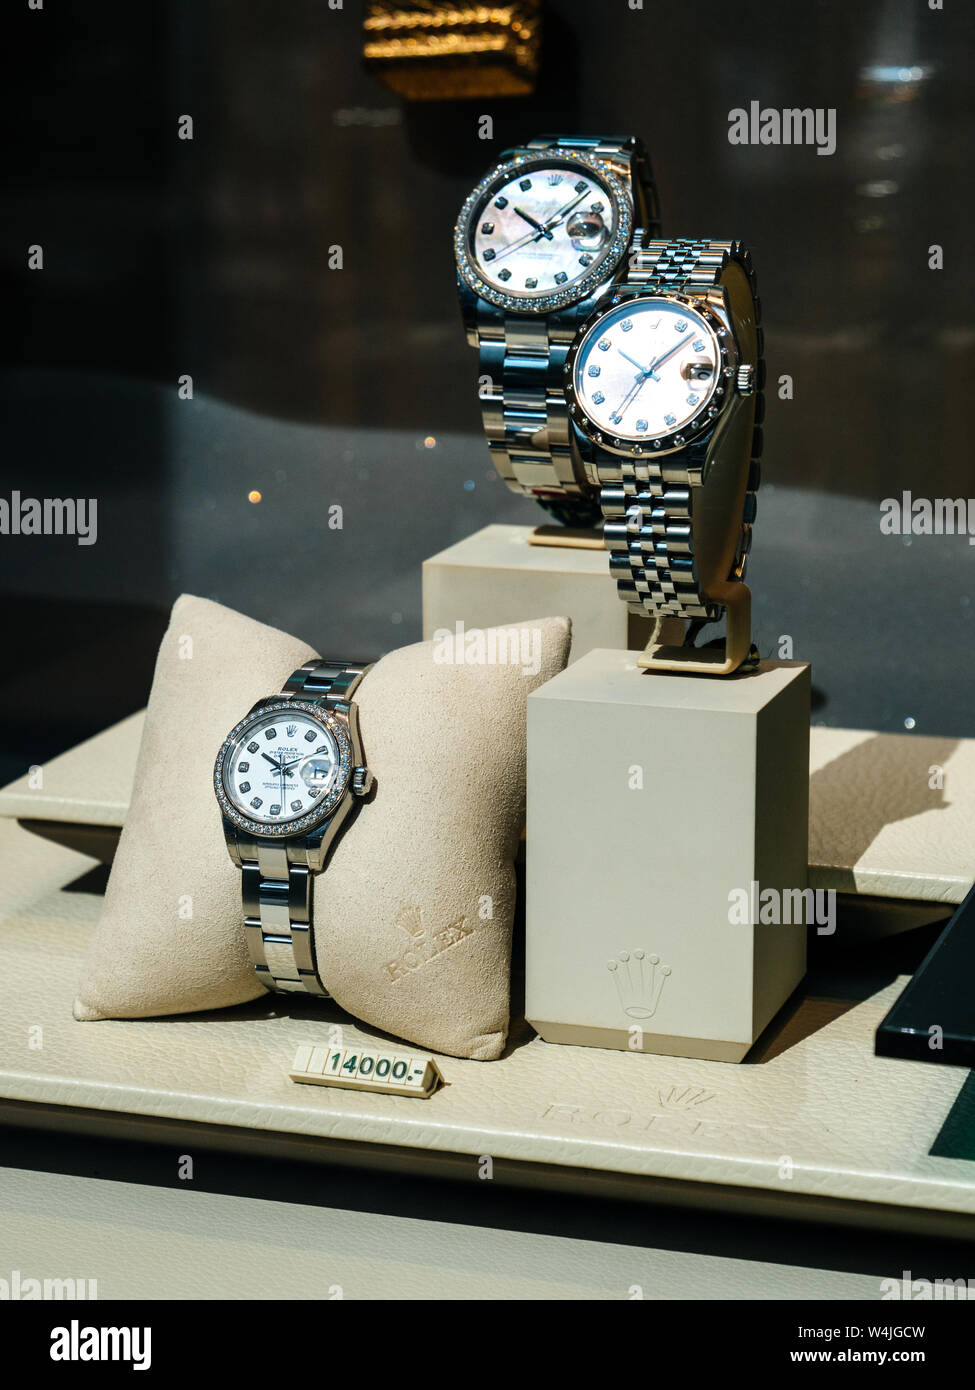 Barcelona, Spain - Jun1 1, 2018: Modern new last collection of luxury wrist  Swiss watch manufactured by Rolex model Oyster Perpetual with Diamonds and  price tag 14000 euros Stock Photo - Alamy